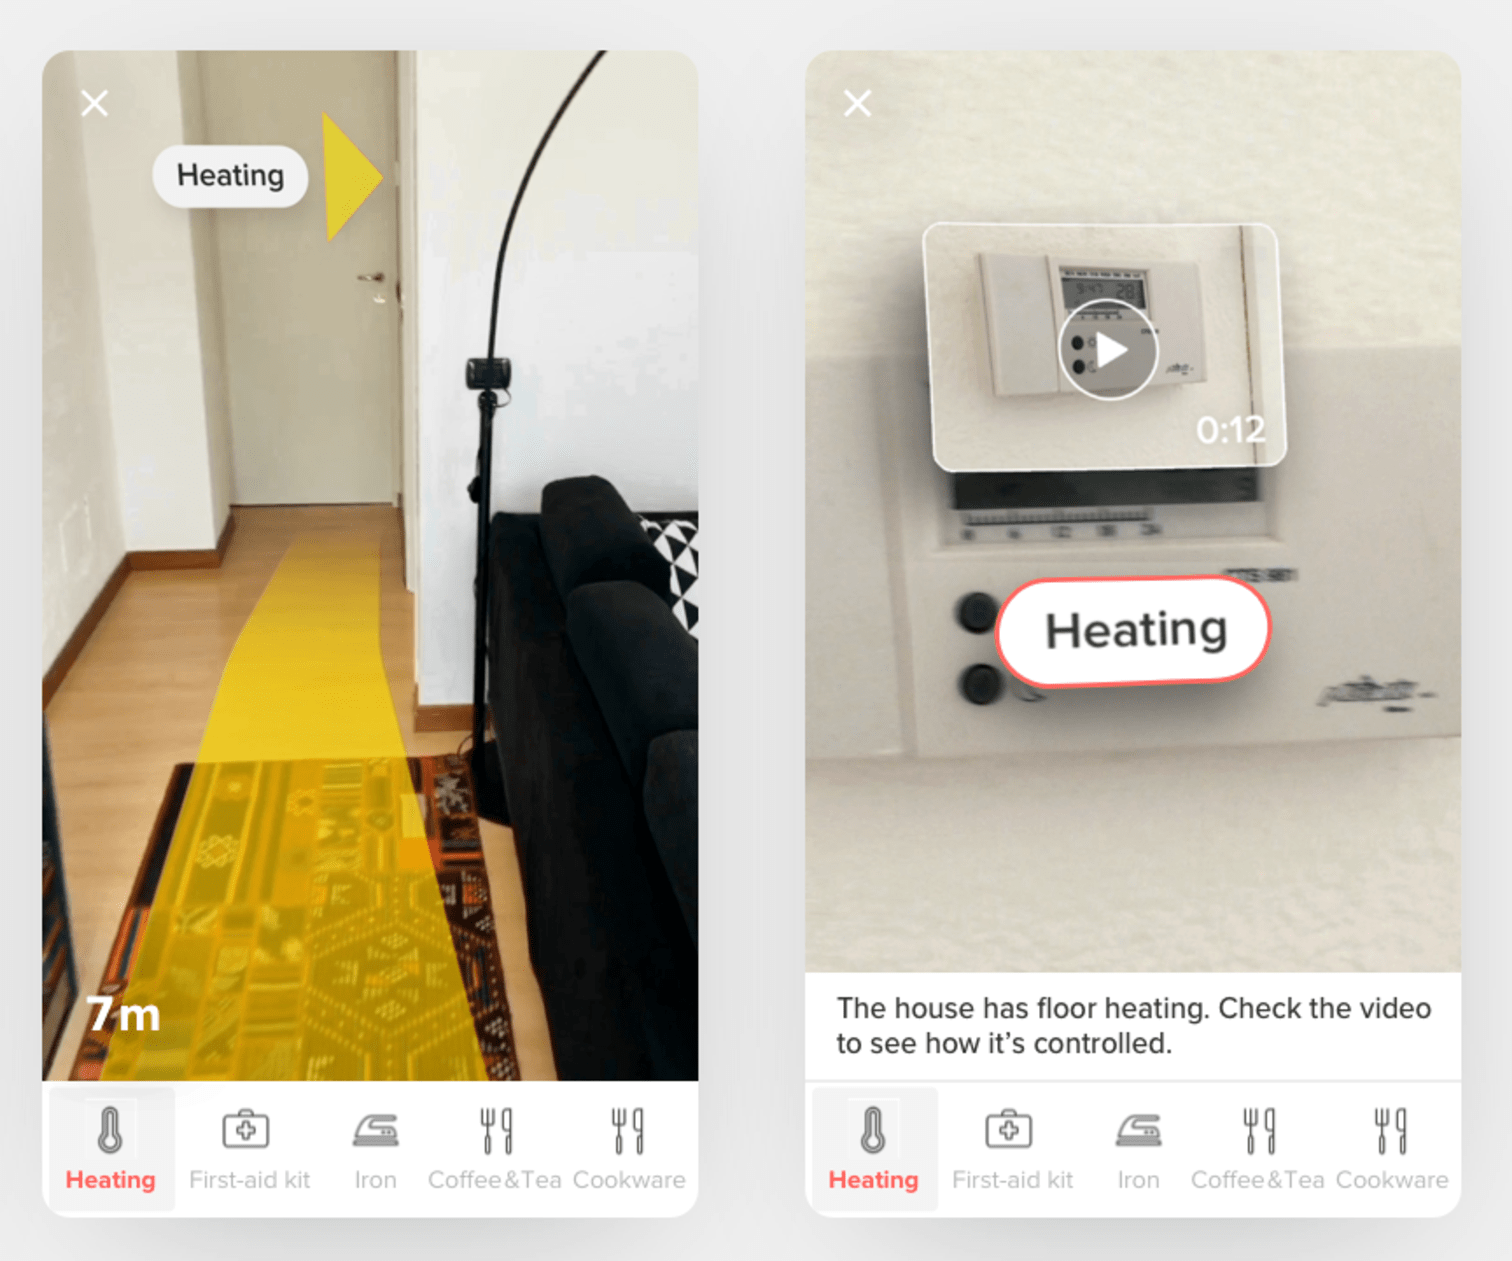 Airbnb ARKit